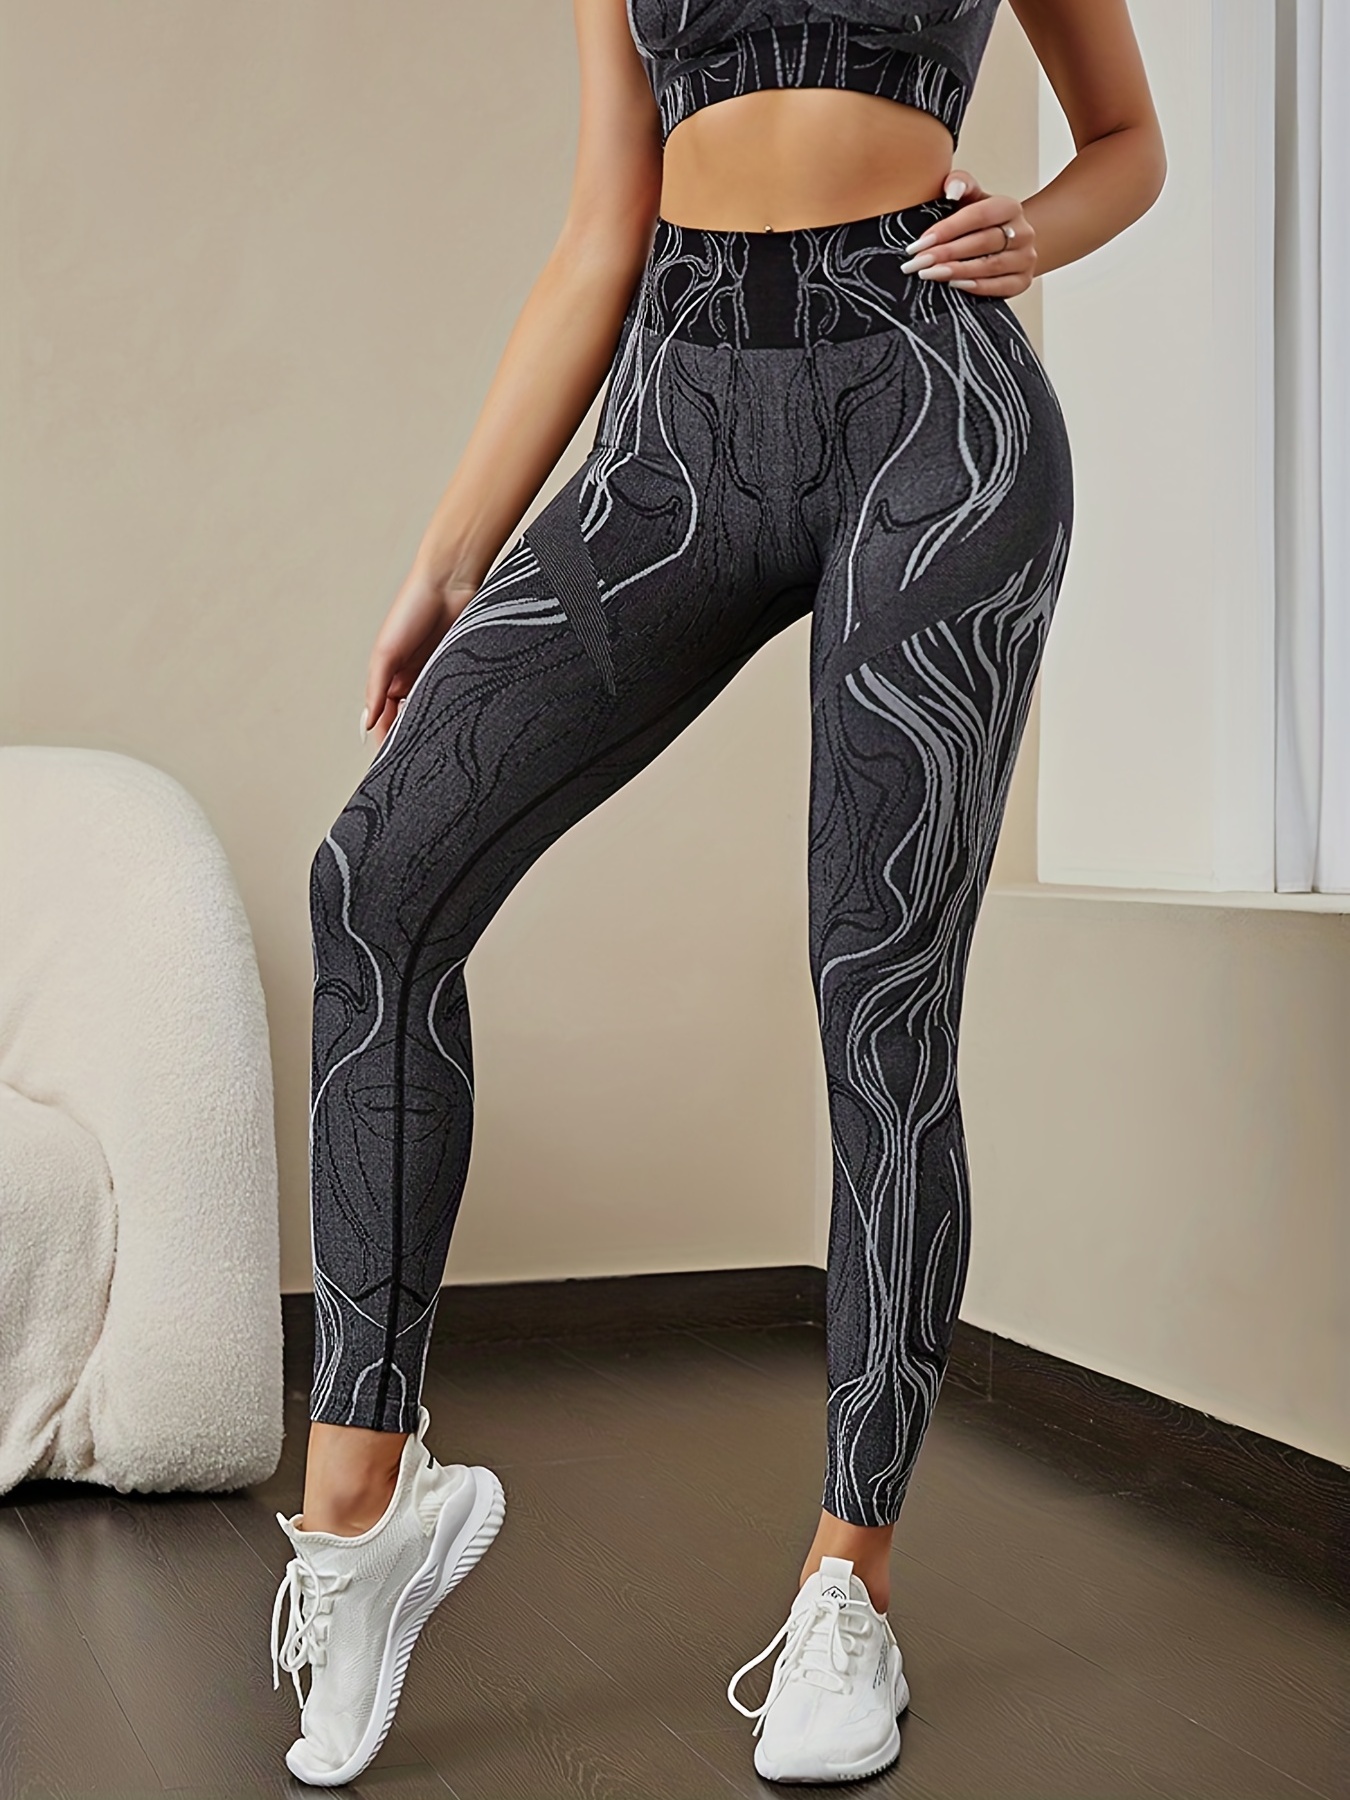 Coats of Arms of Nigeria Women's Yoga Pants High Waisted Workout Leggings  Stretch Athletic Gym Print Long Pants